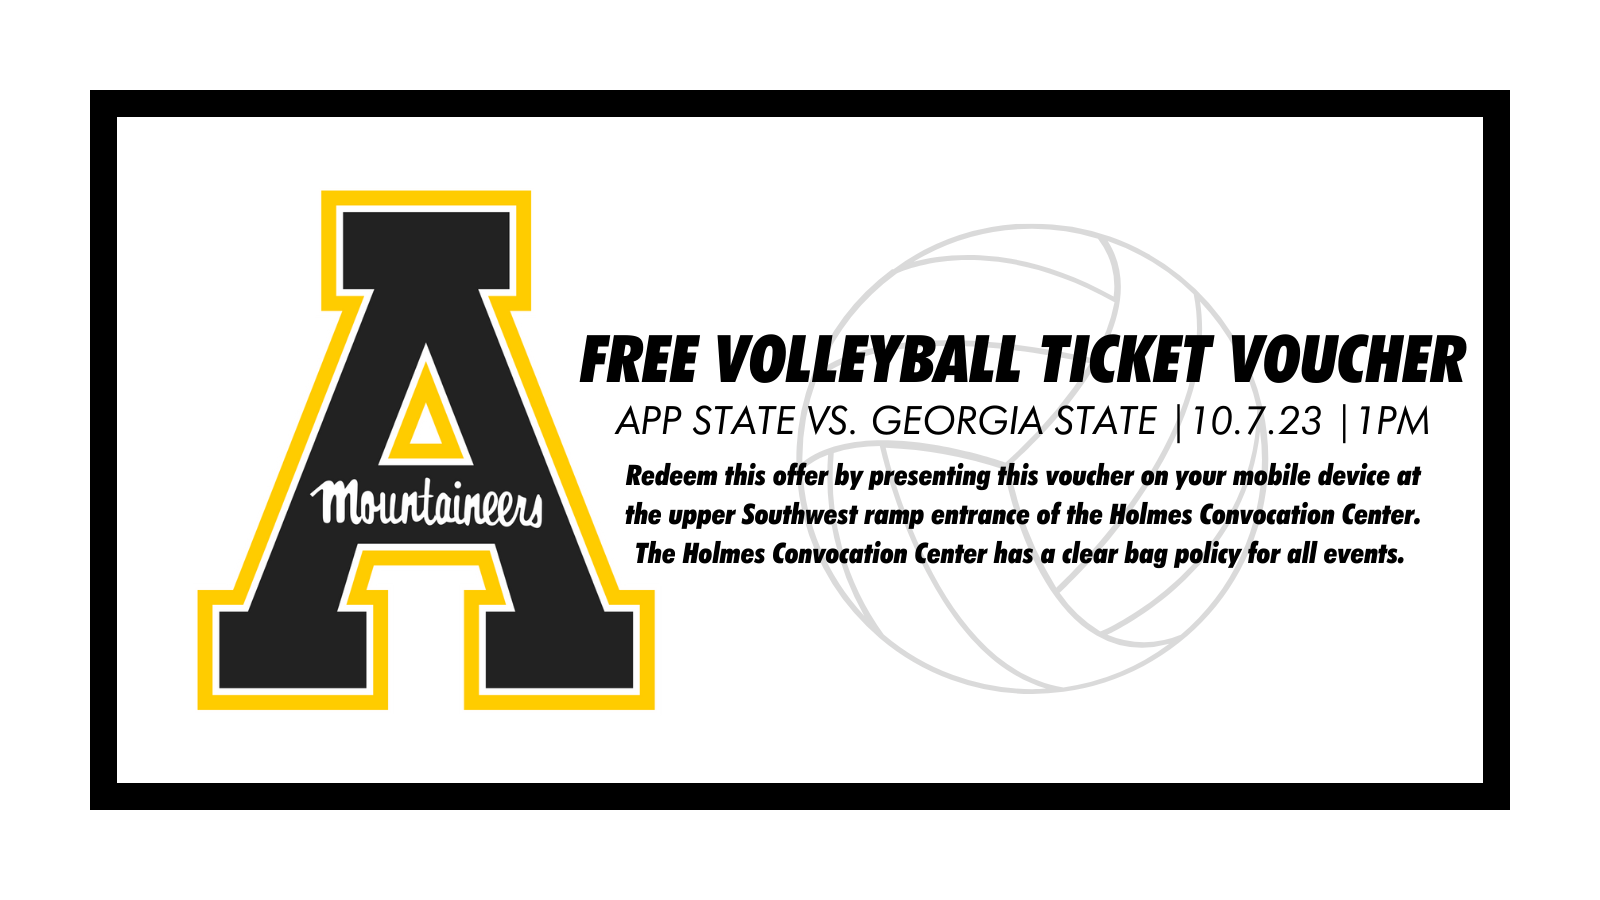 App State Volleyball Game Voucher October 7 at 1pm